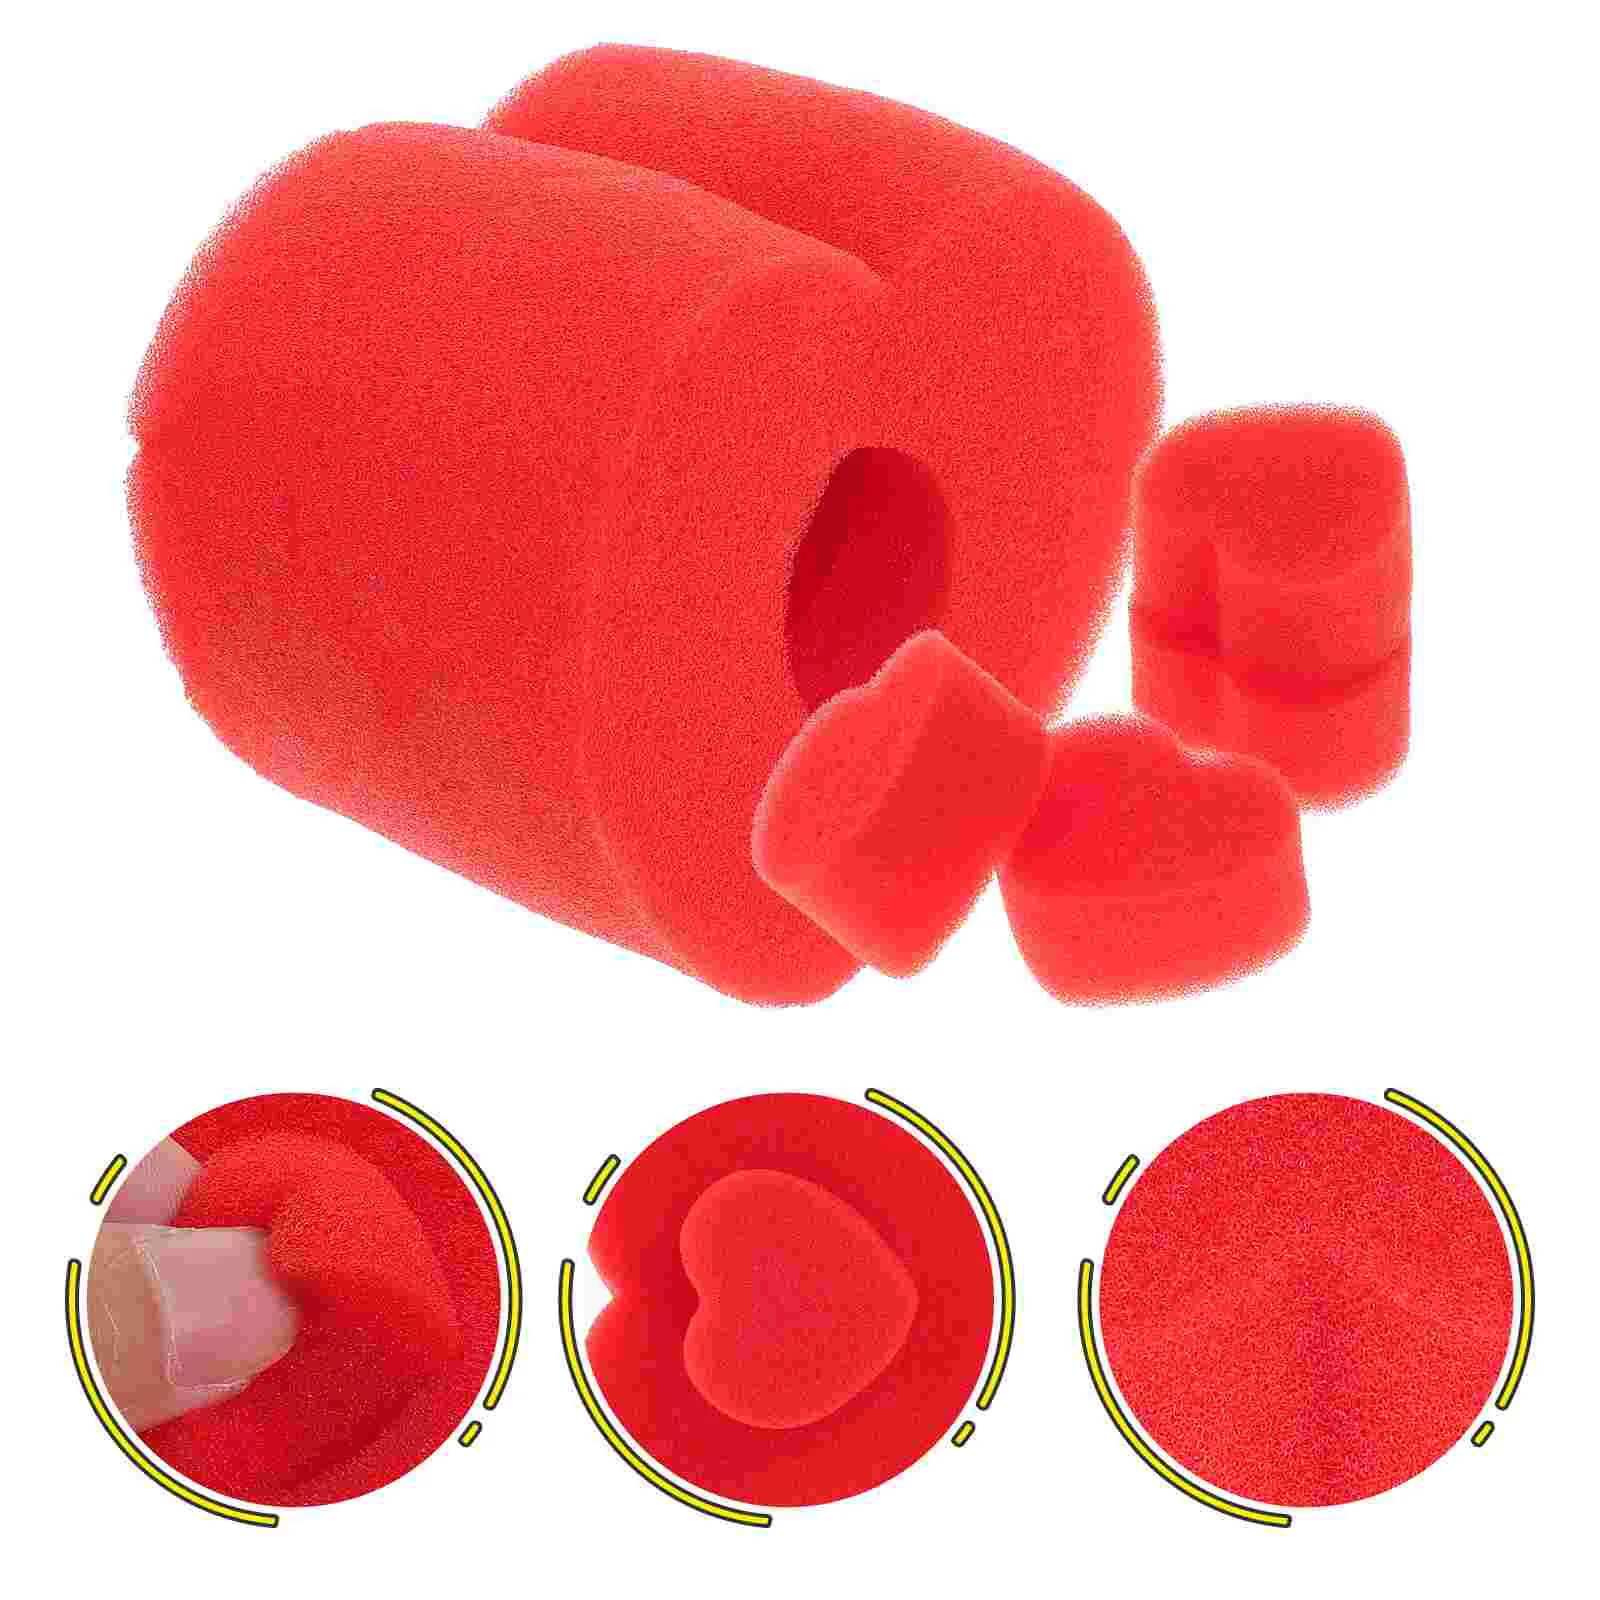 

Sponge Redparty Props Funny Christmas Trickfor Stuff Performance Tricks Clown Nose Year Favor Combo Games New Suppliesprop Teens